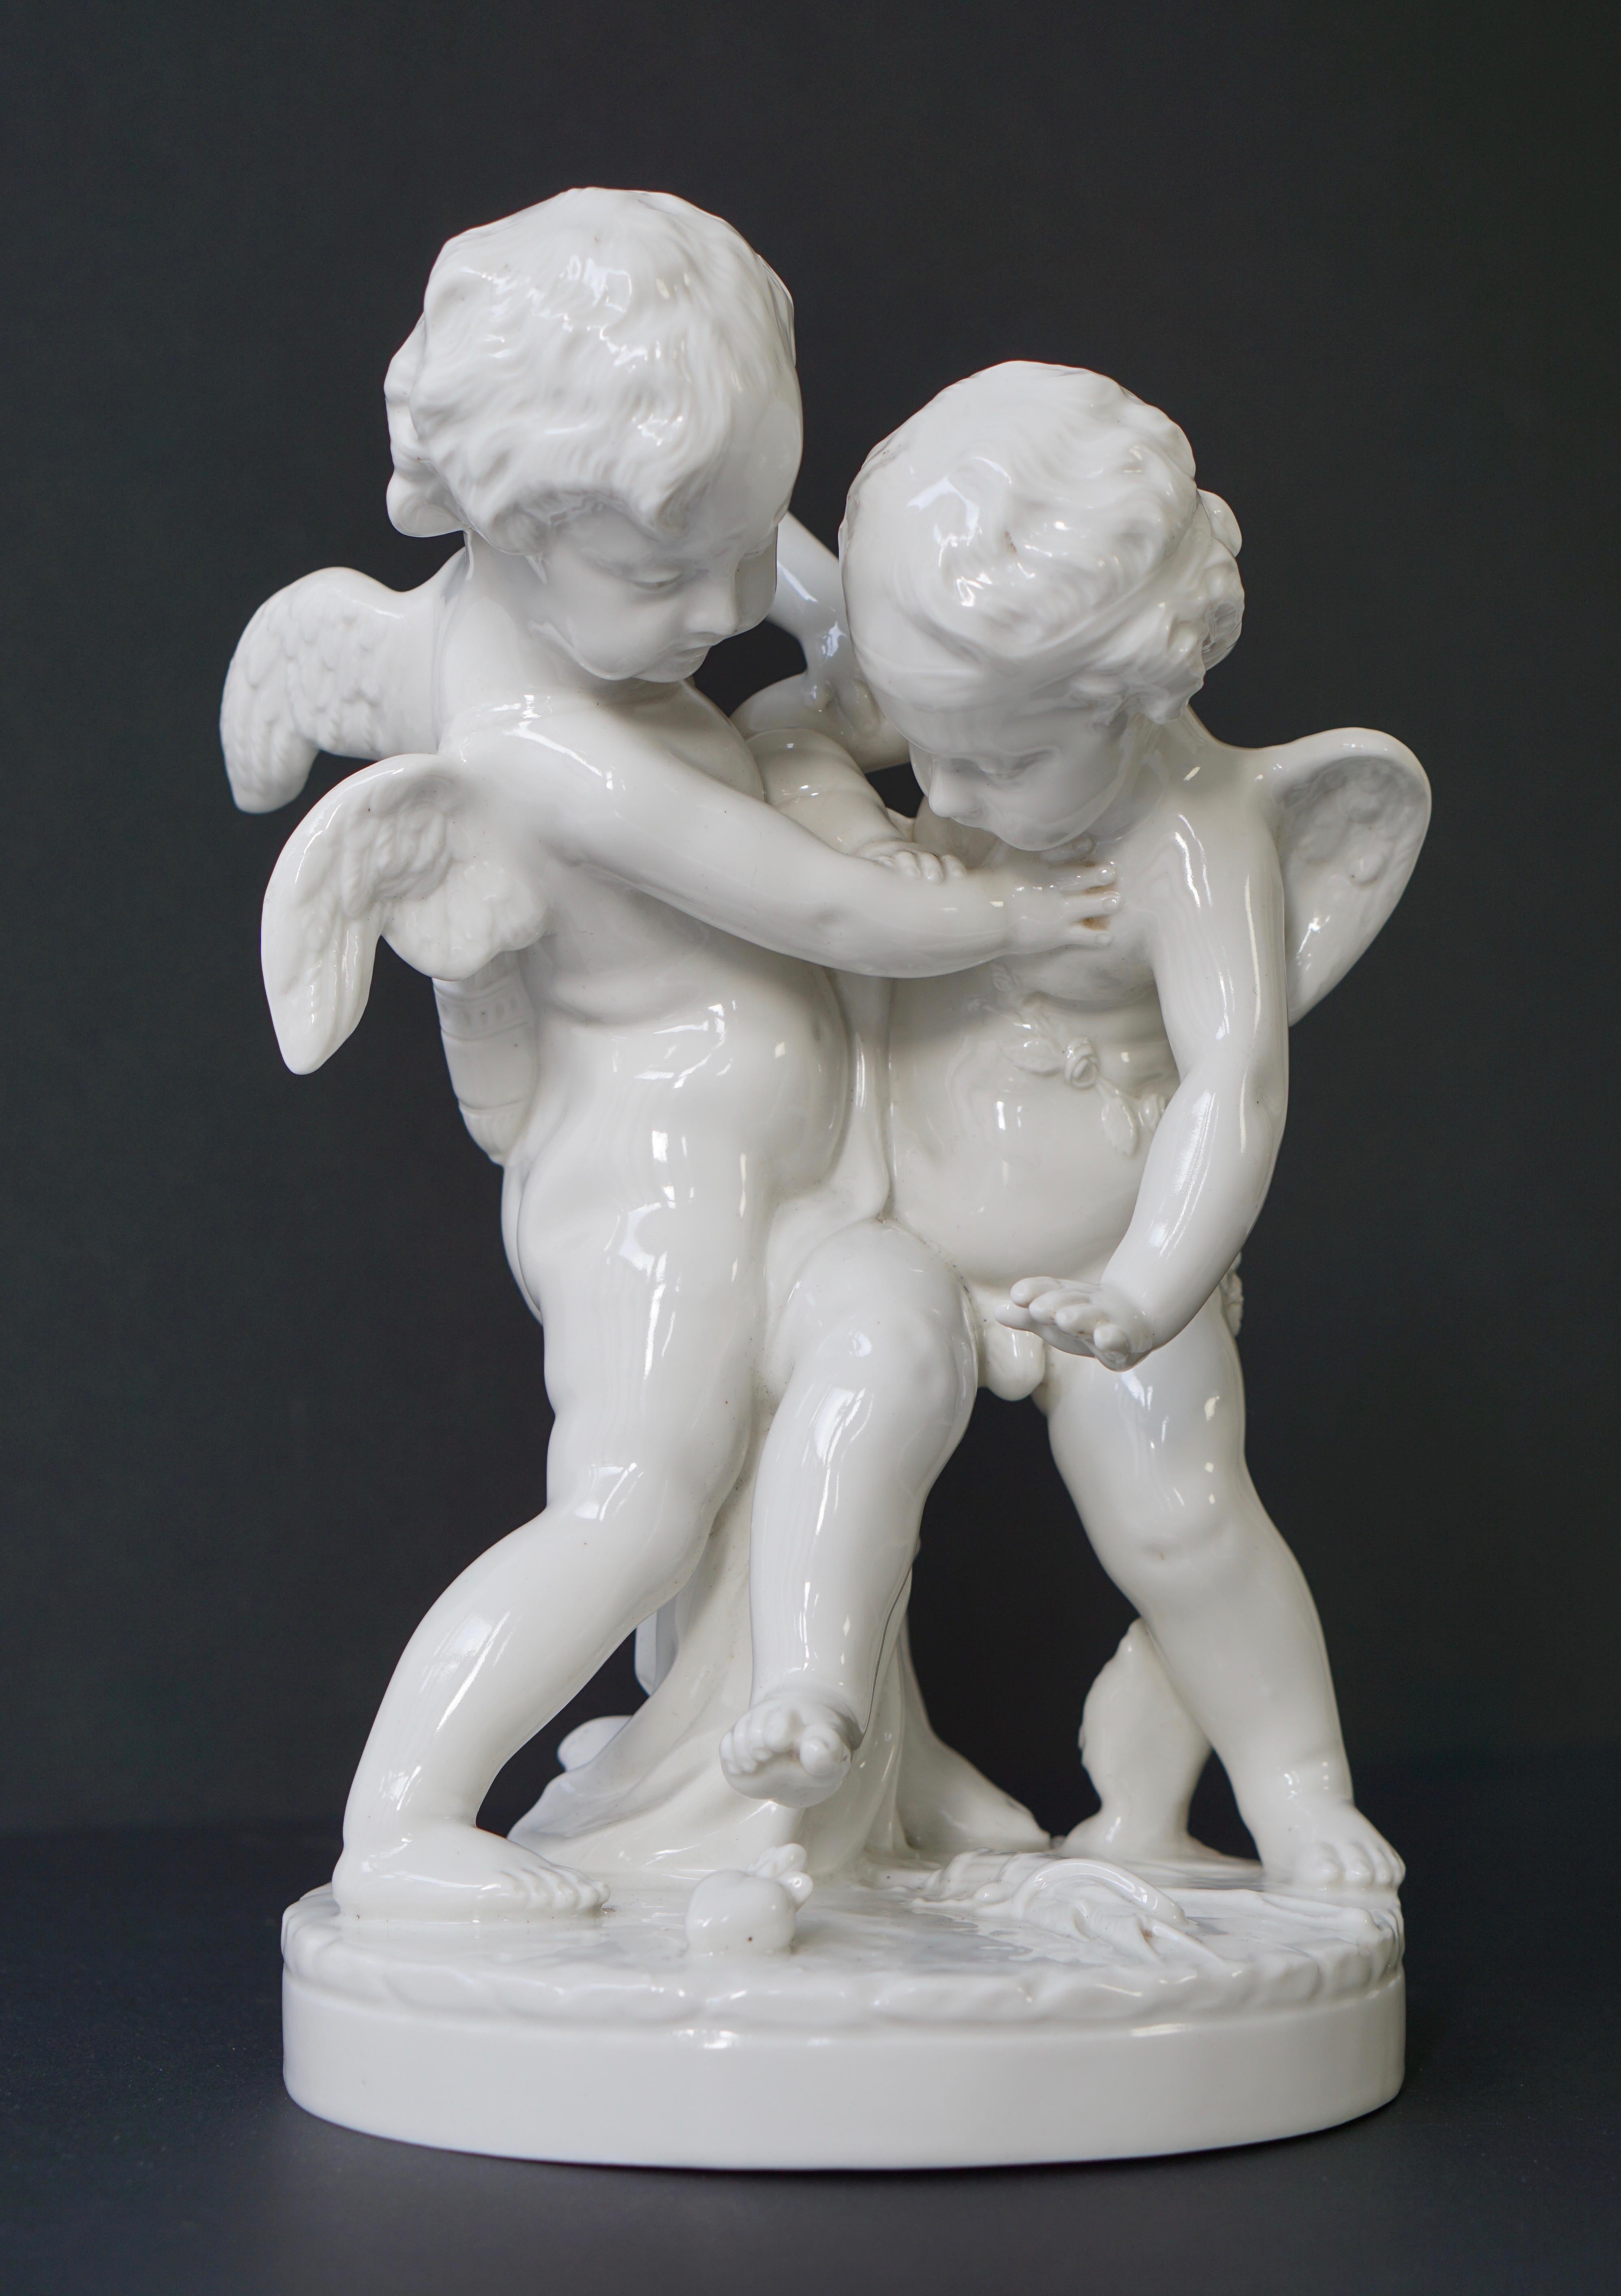  Porcelain Figurative Sculpture Representing Two Little Angels, Putti For Sale 4